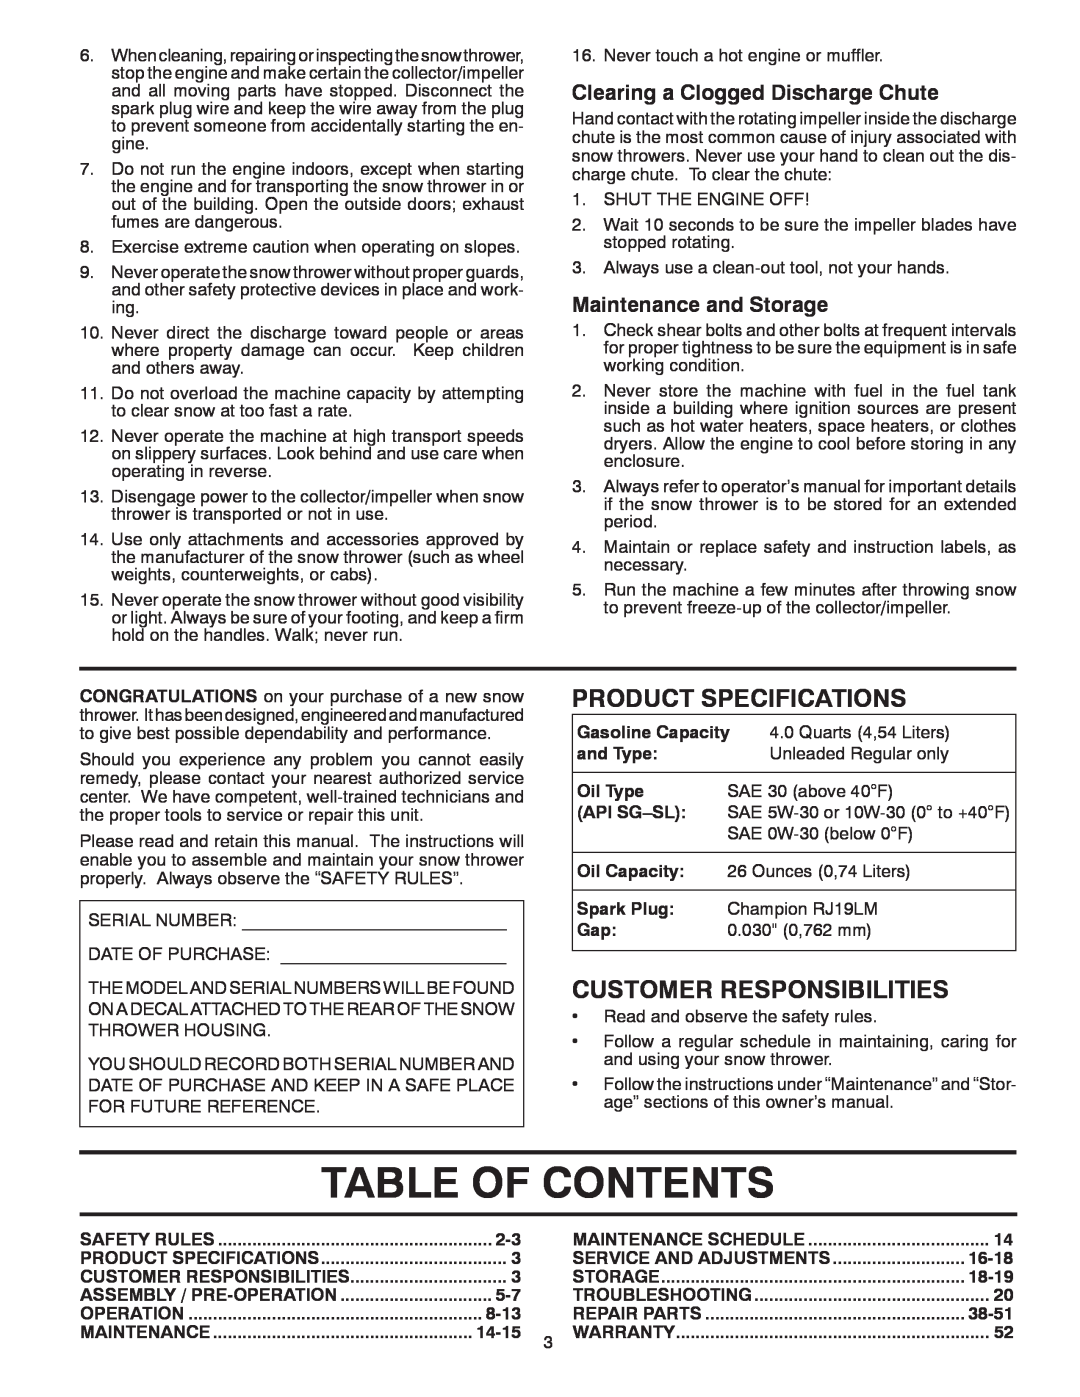 Poulan 414949 Table Of Contents, Product Specifications, Customer Responsibilities, Clearing a Clogged Discharge Chute 